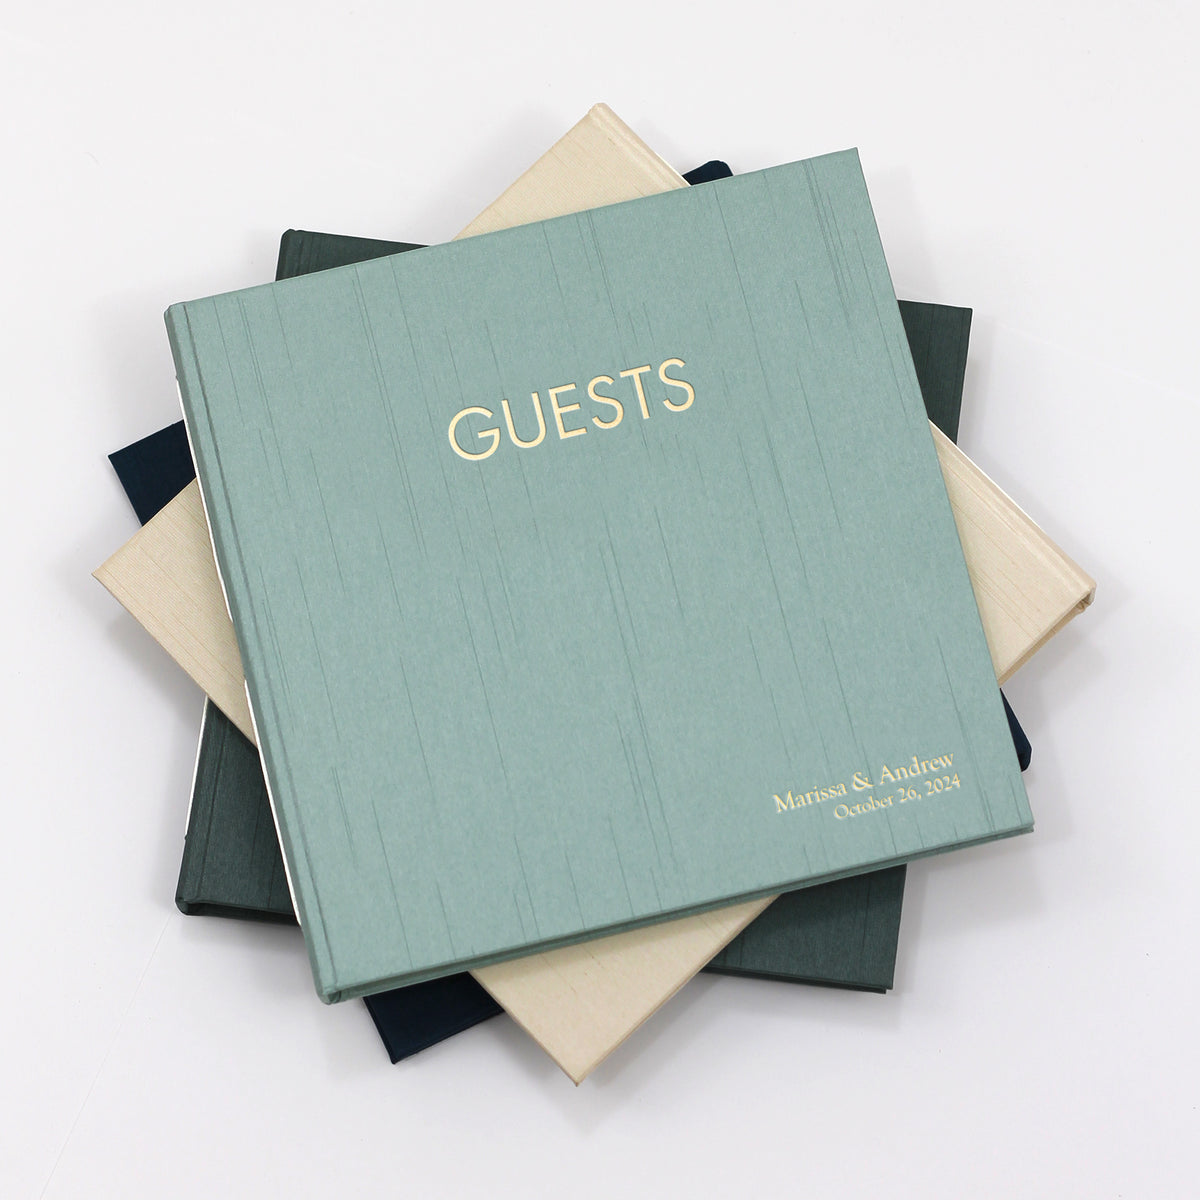 Event Guestbook Embossed with “Guests” | Cover: Emerald Silk | Available Personalized